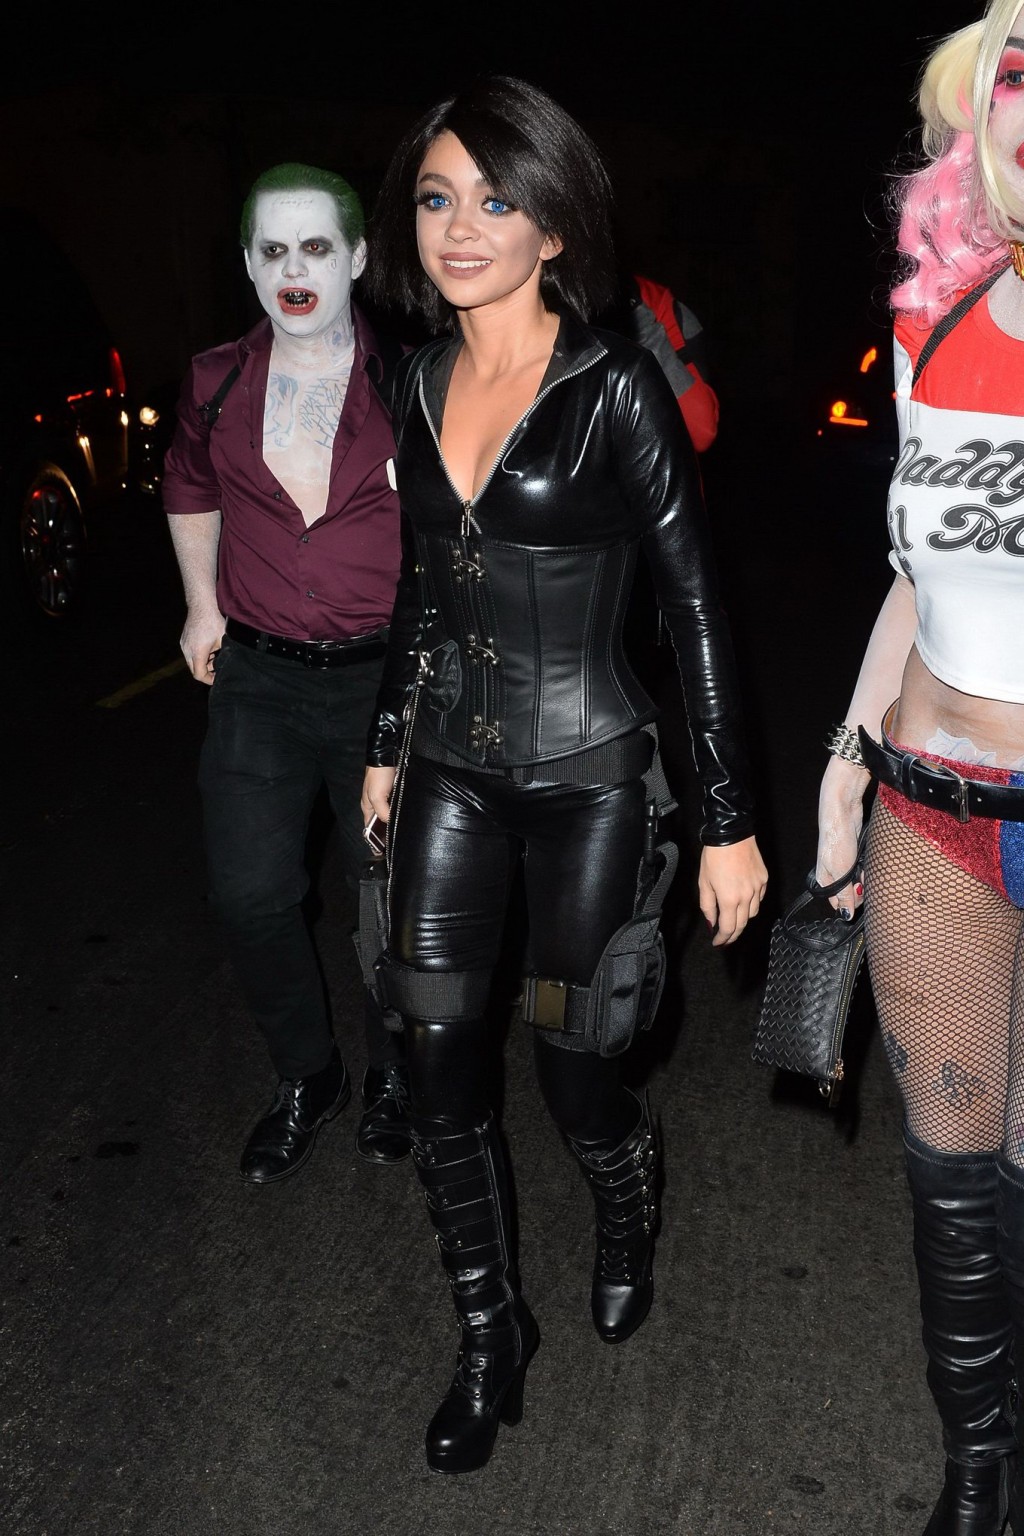 Sarah Hyland stunning in tight black leather for Halloween #75150466